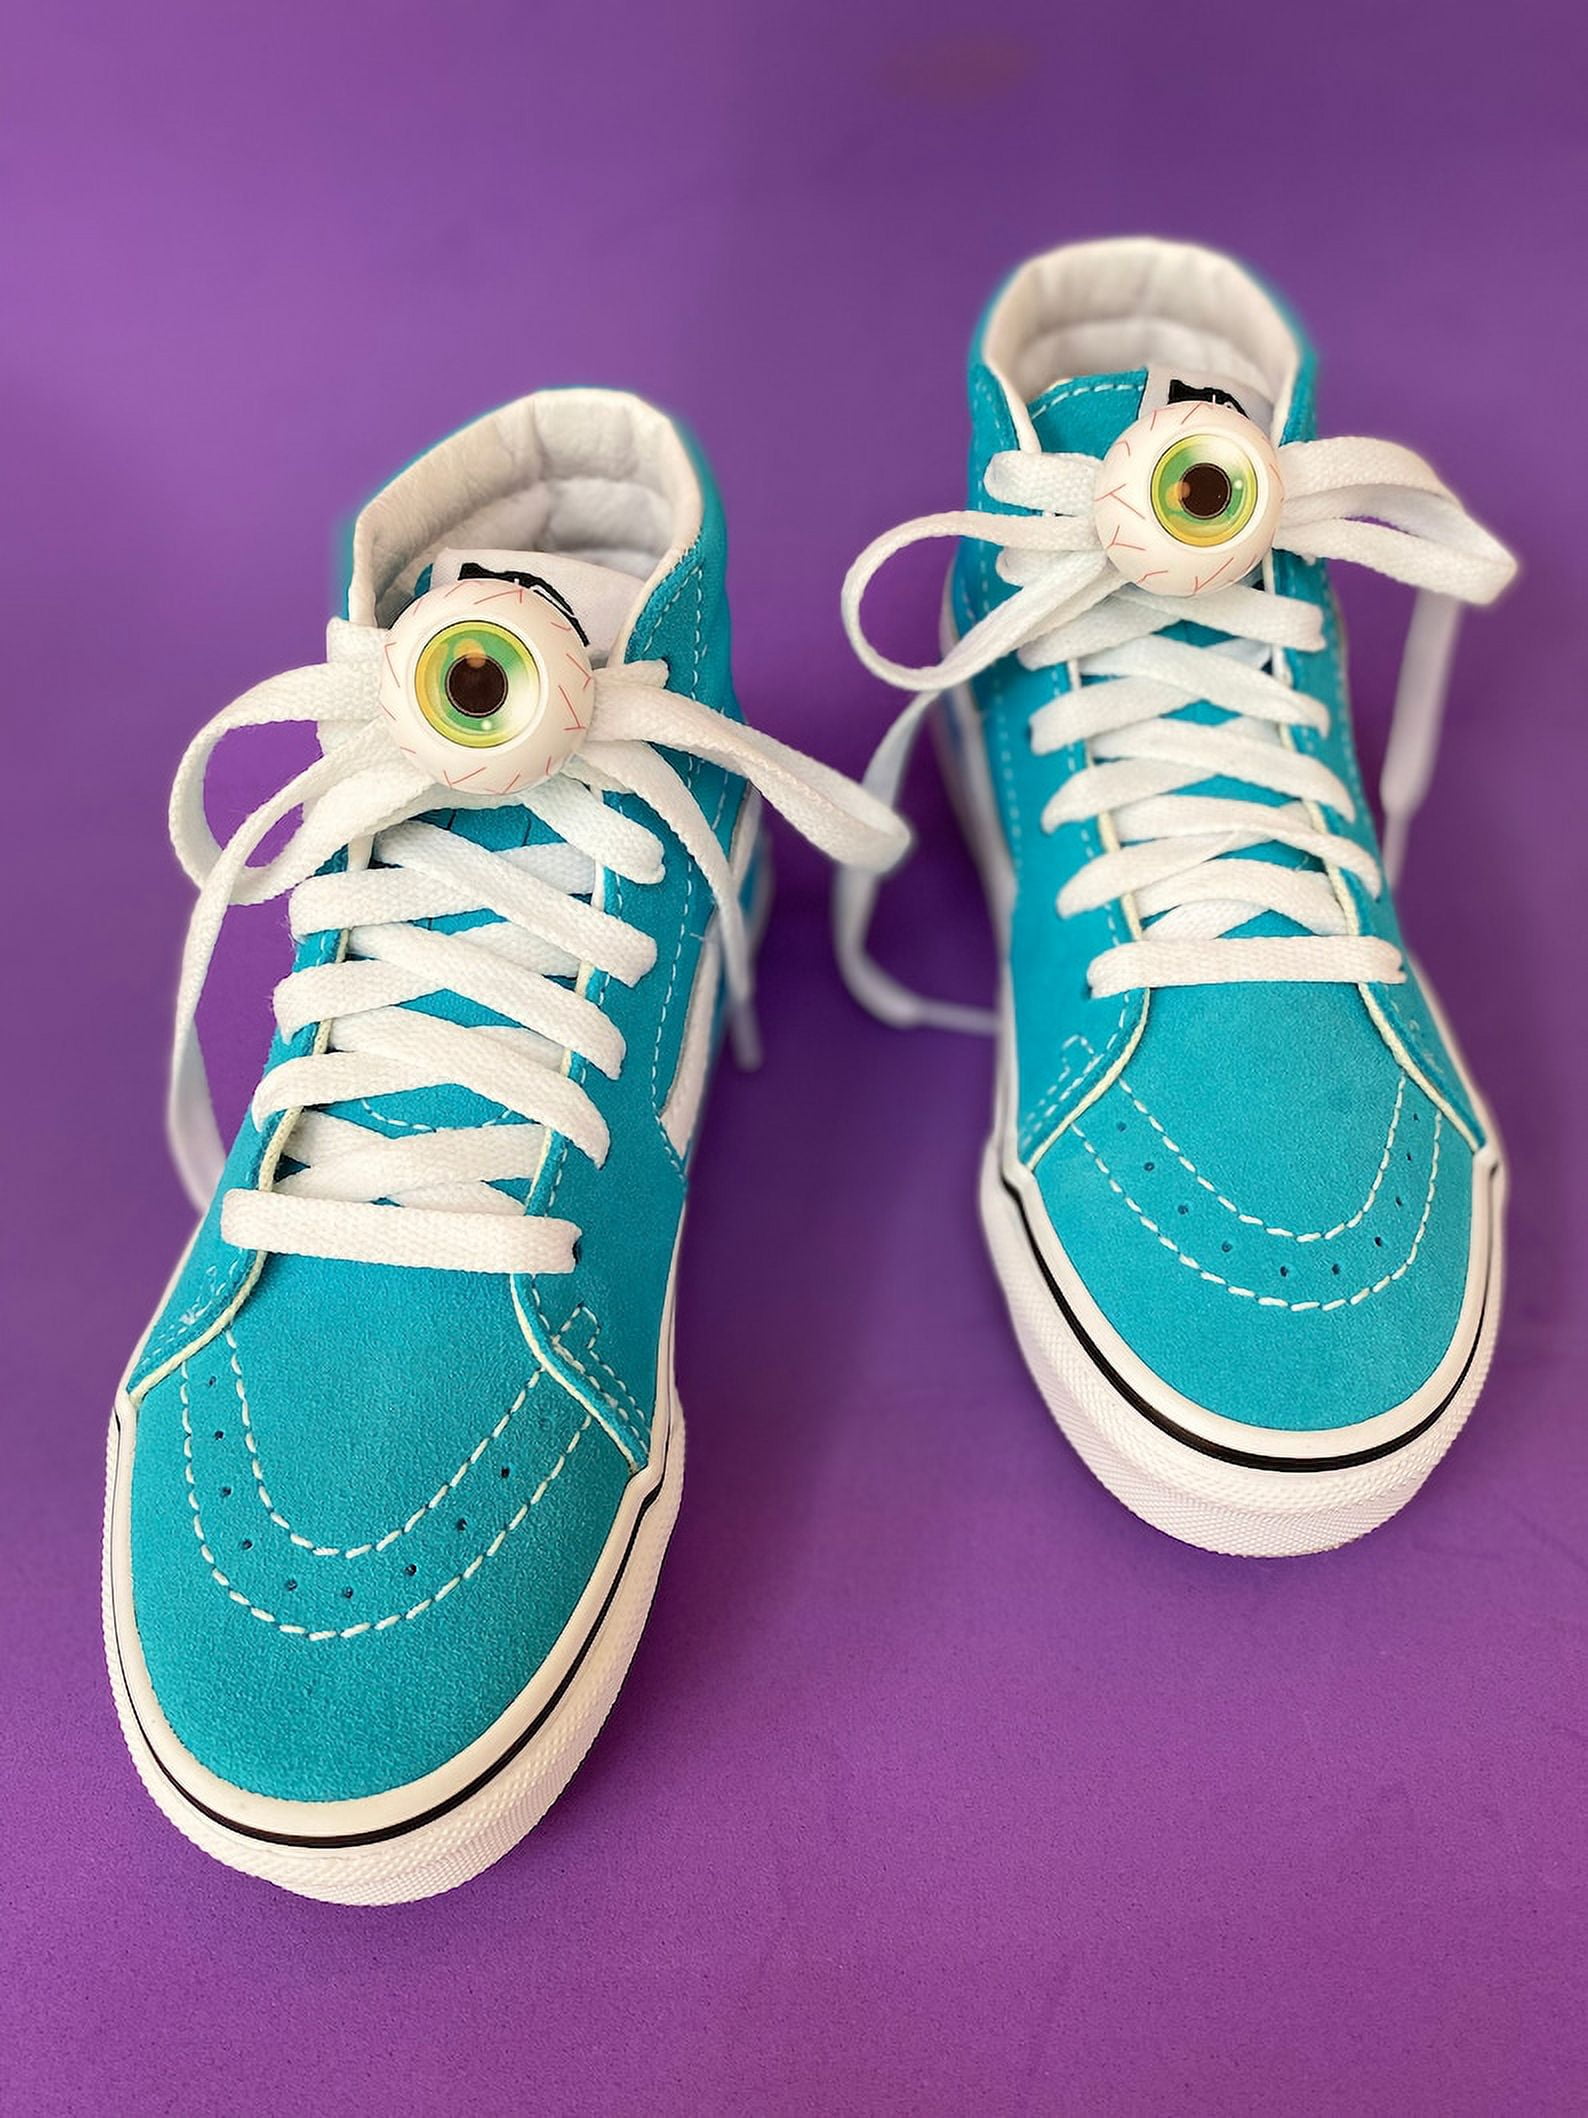 Shoelace locks - fun to wear and keep laces tied!